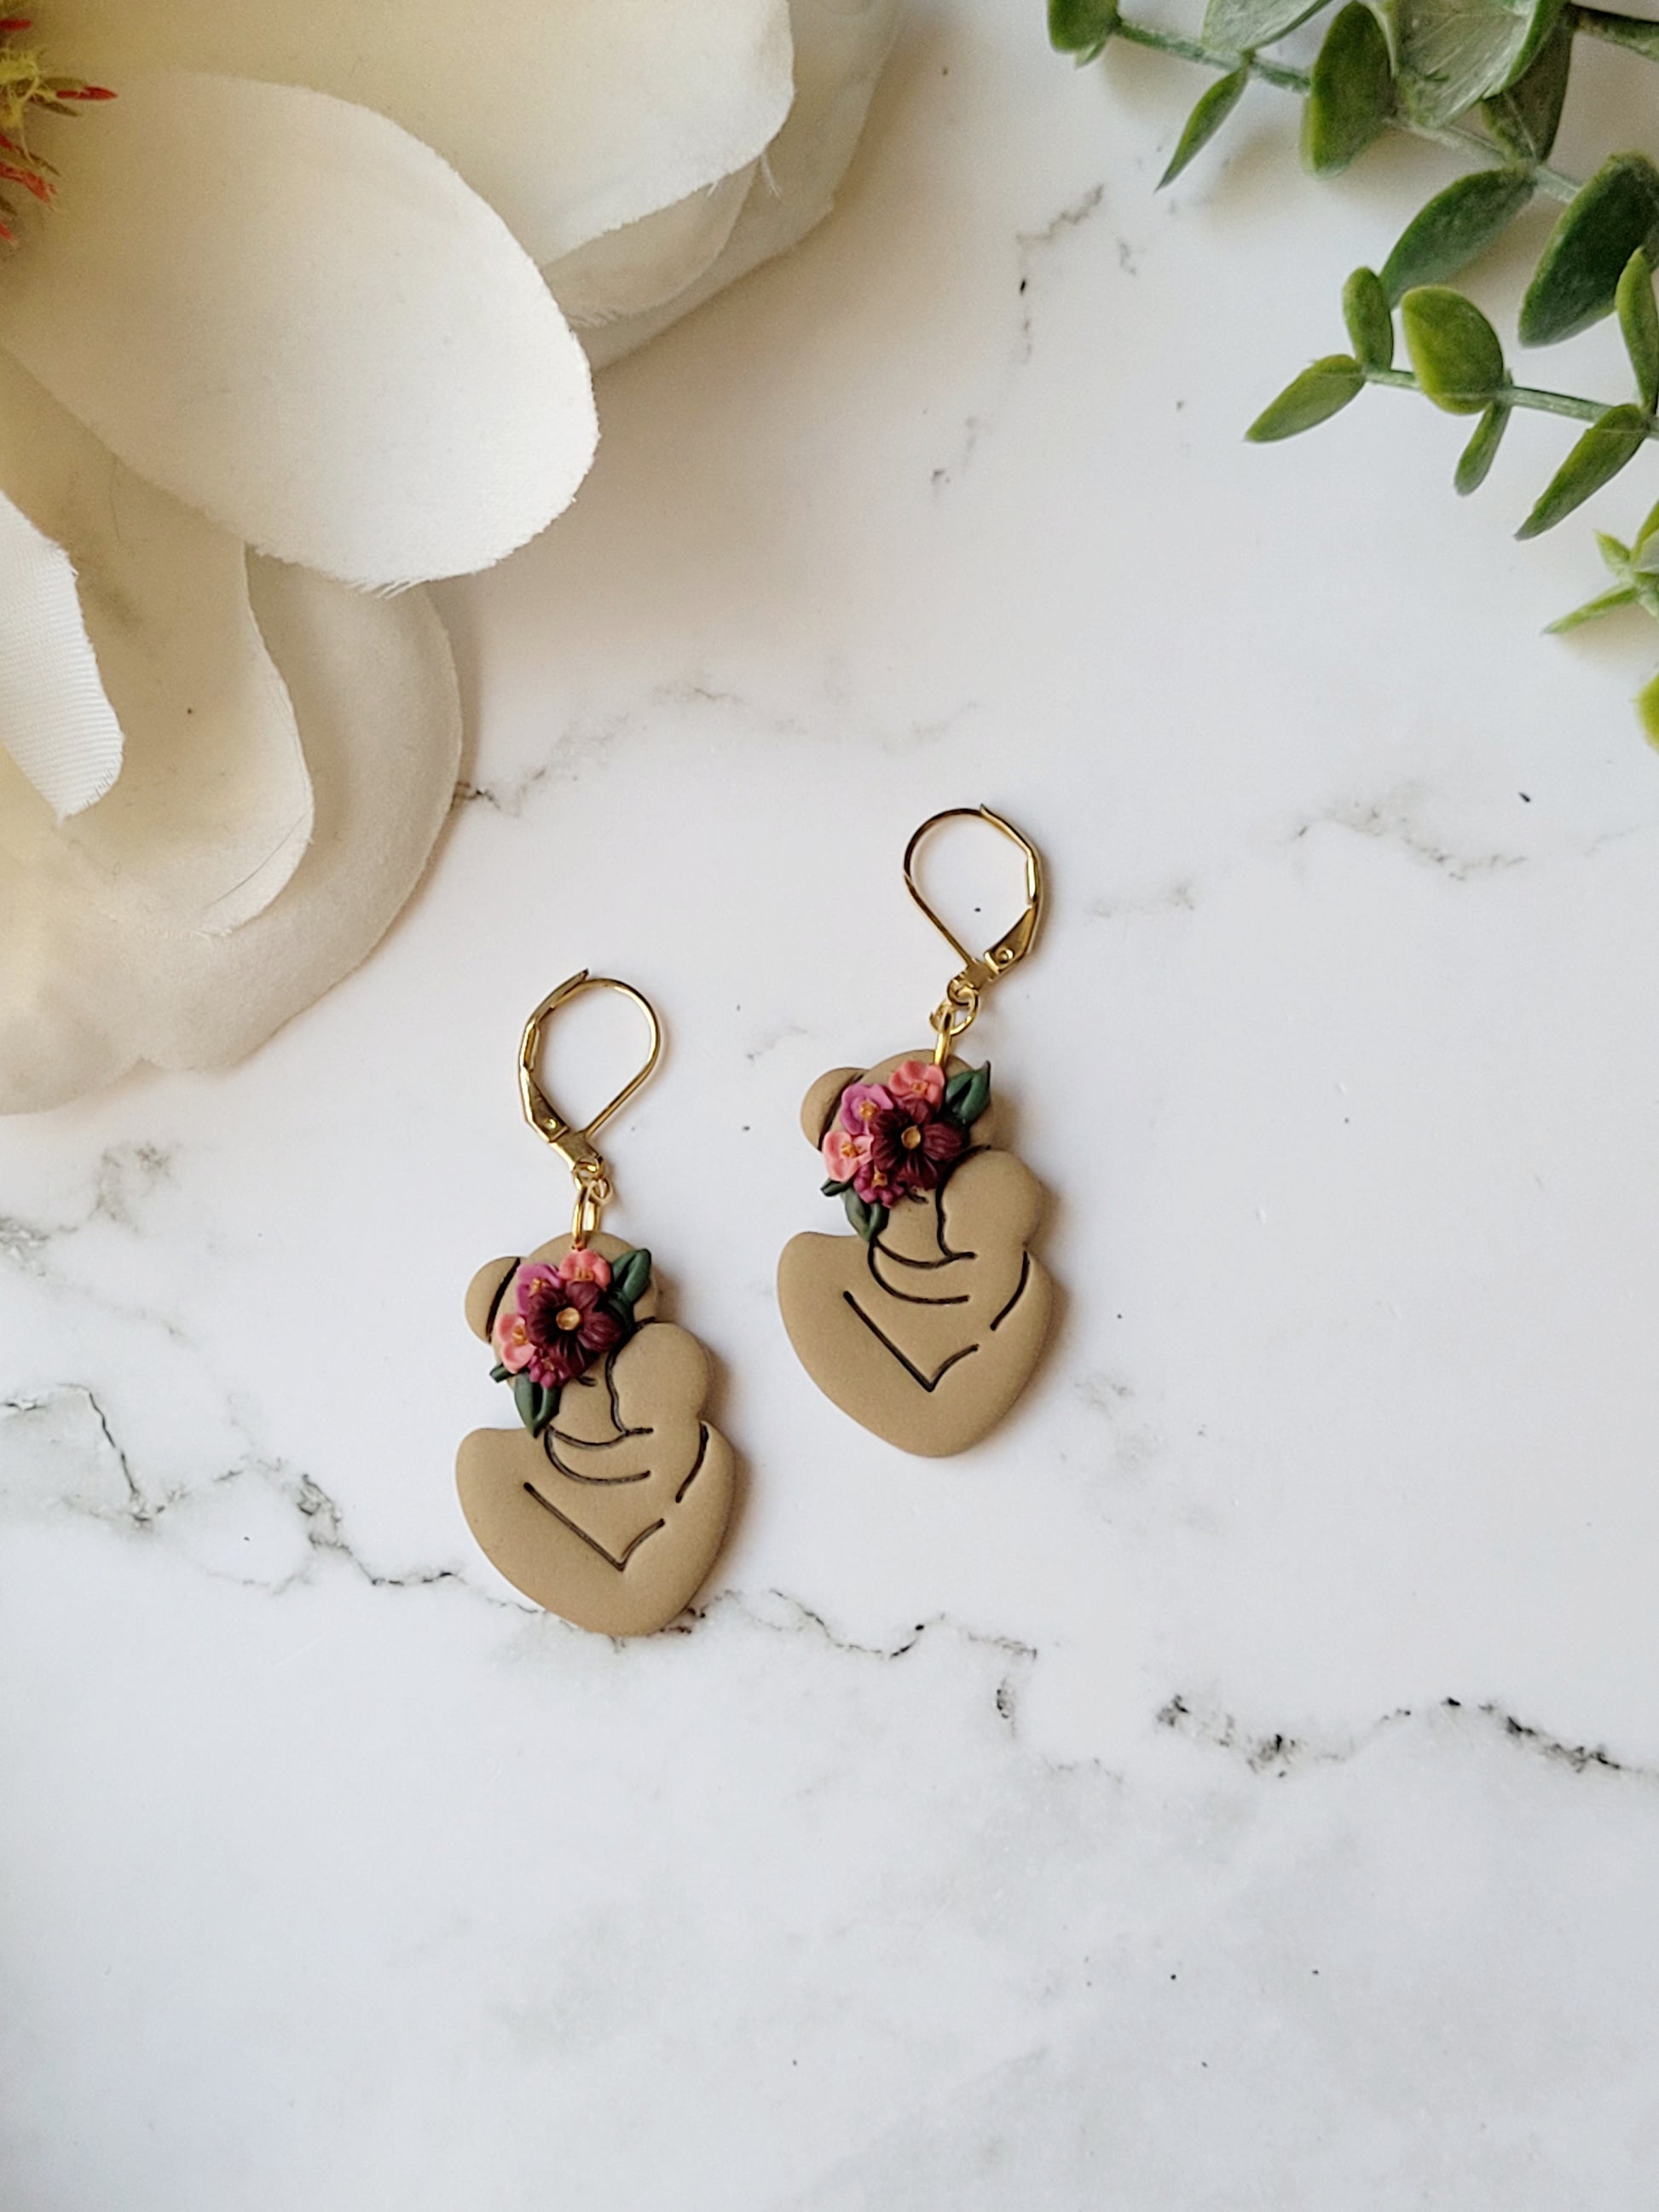 medium skin toned mother and child earring with flowers on a marble background